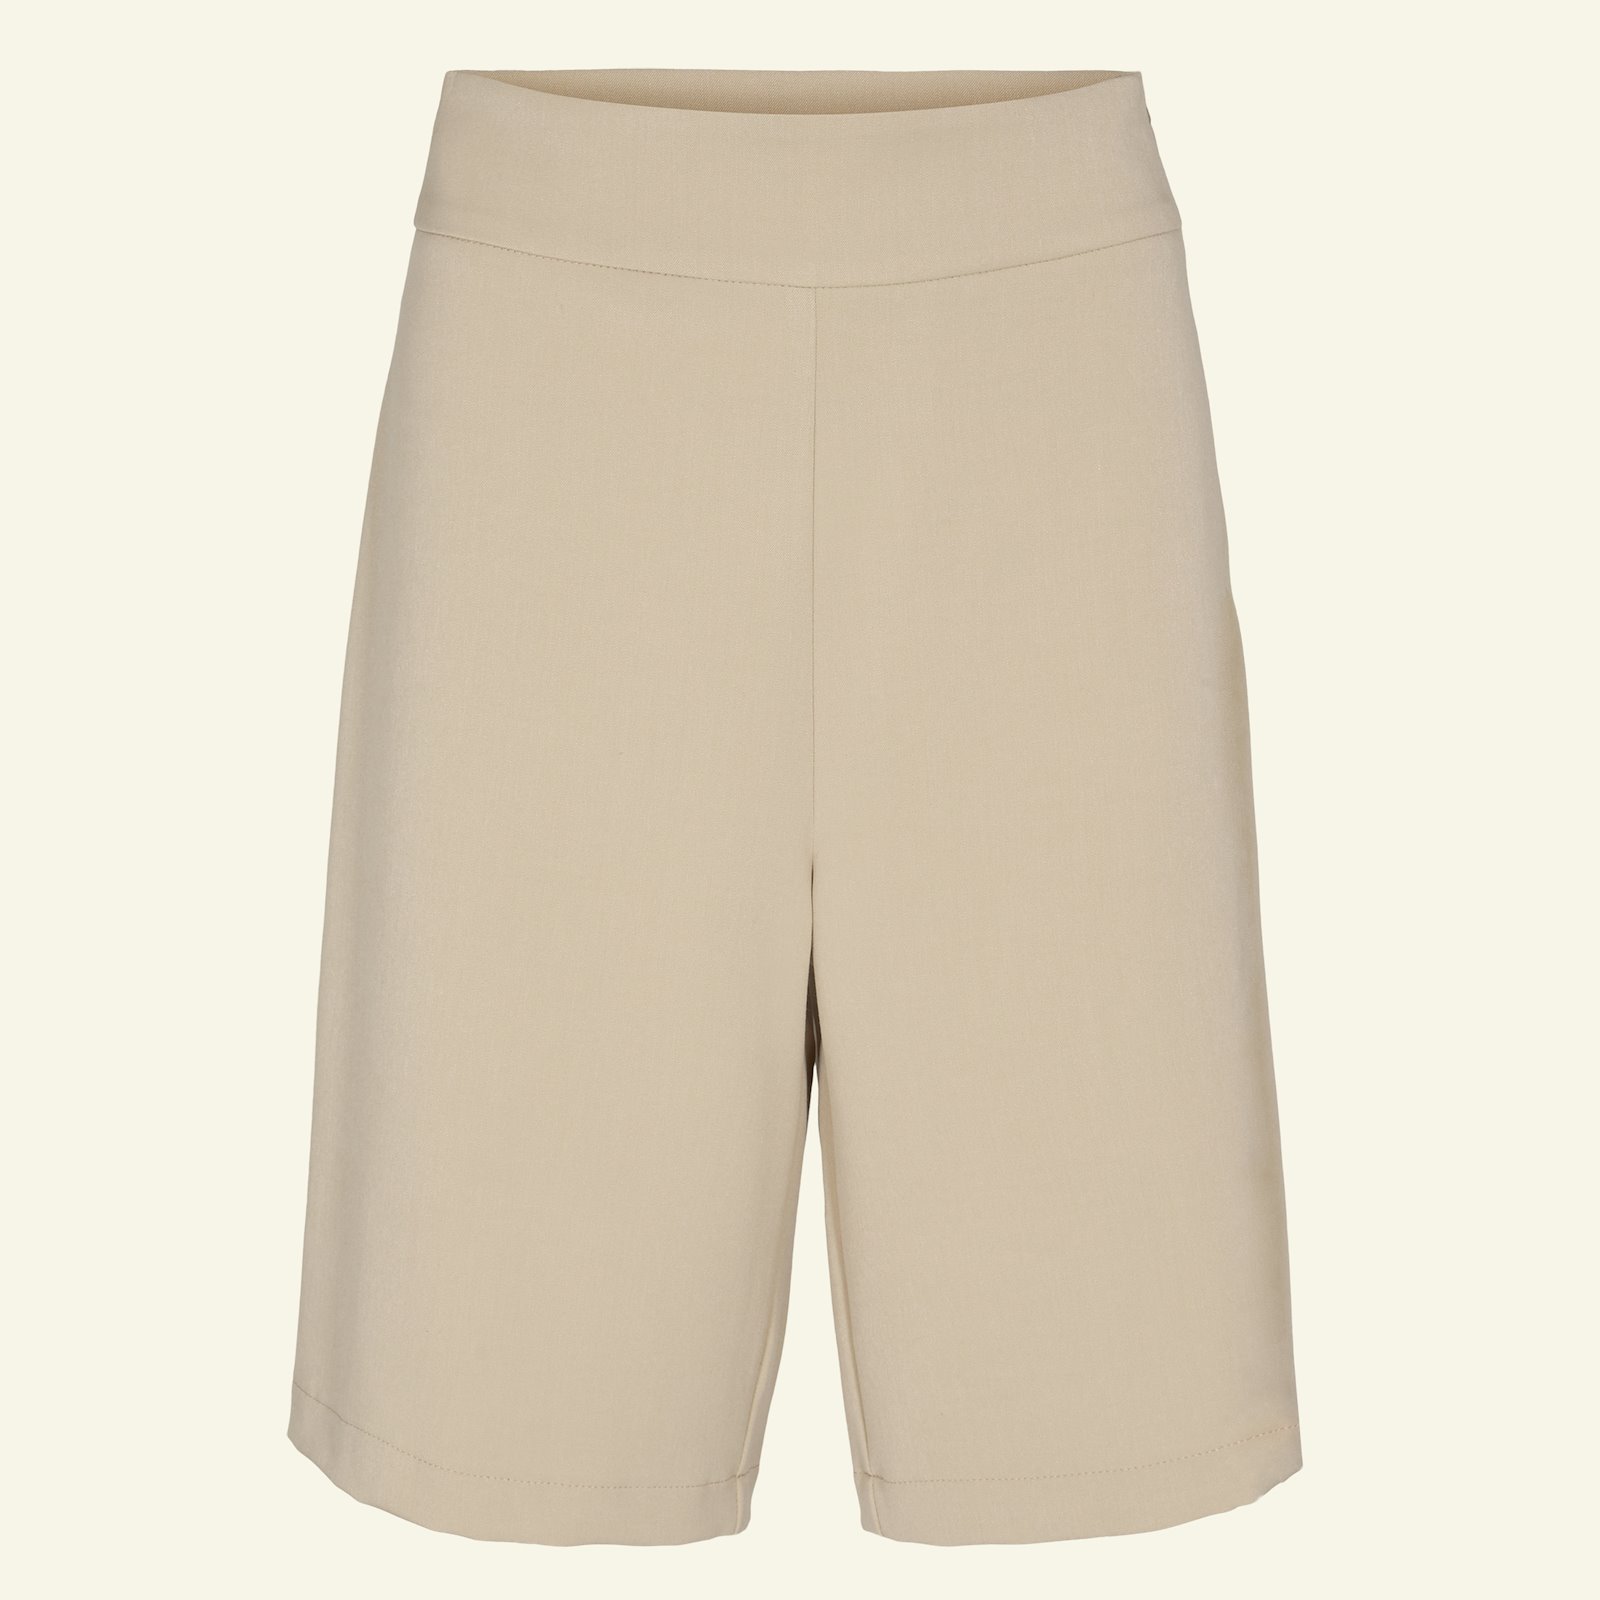 Highwaist and wide legs trousers, 38/10 p20052_460857_sskit